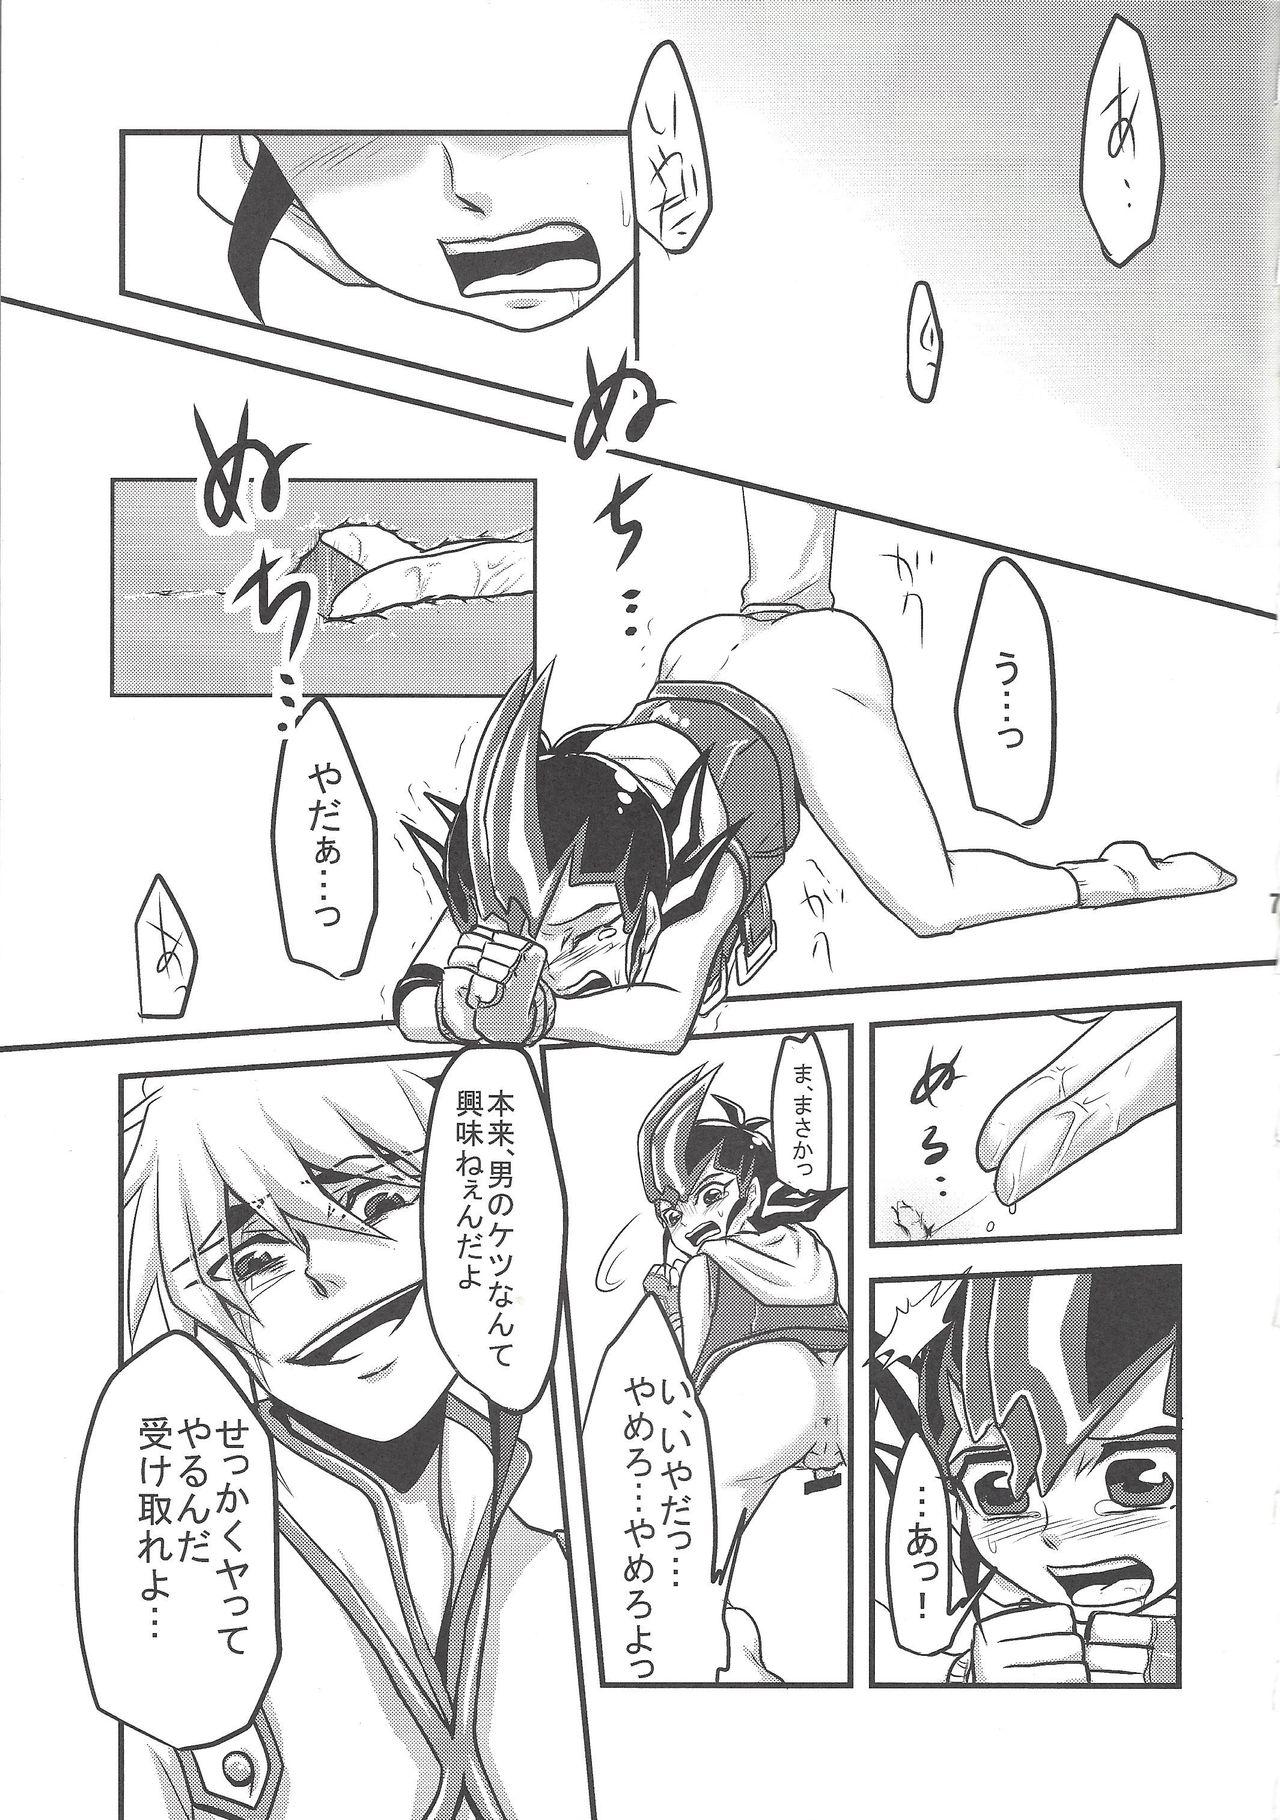 Voyeur Not True Relation - Yu gi oh zexal Real Couple - Page 6